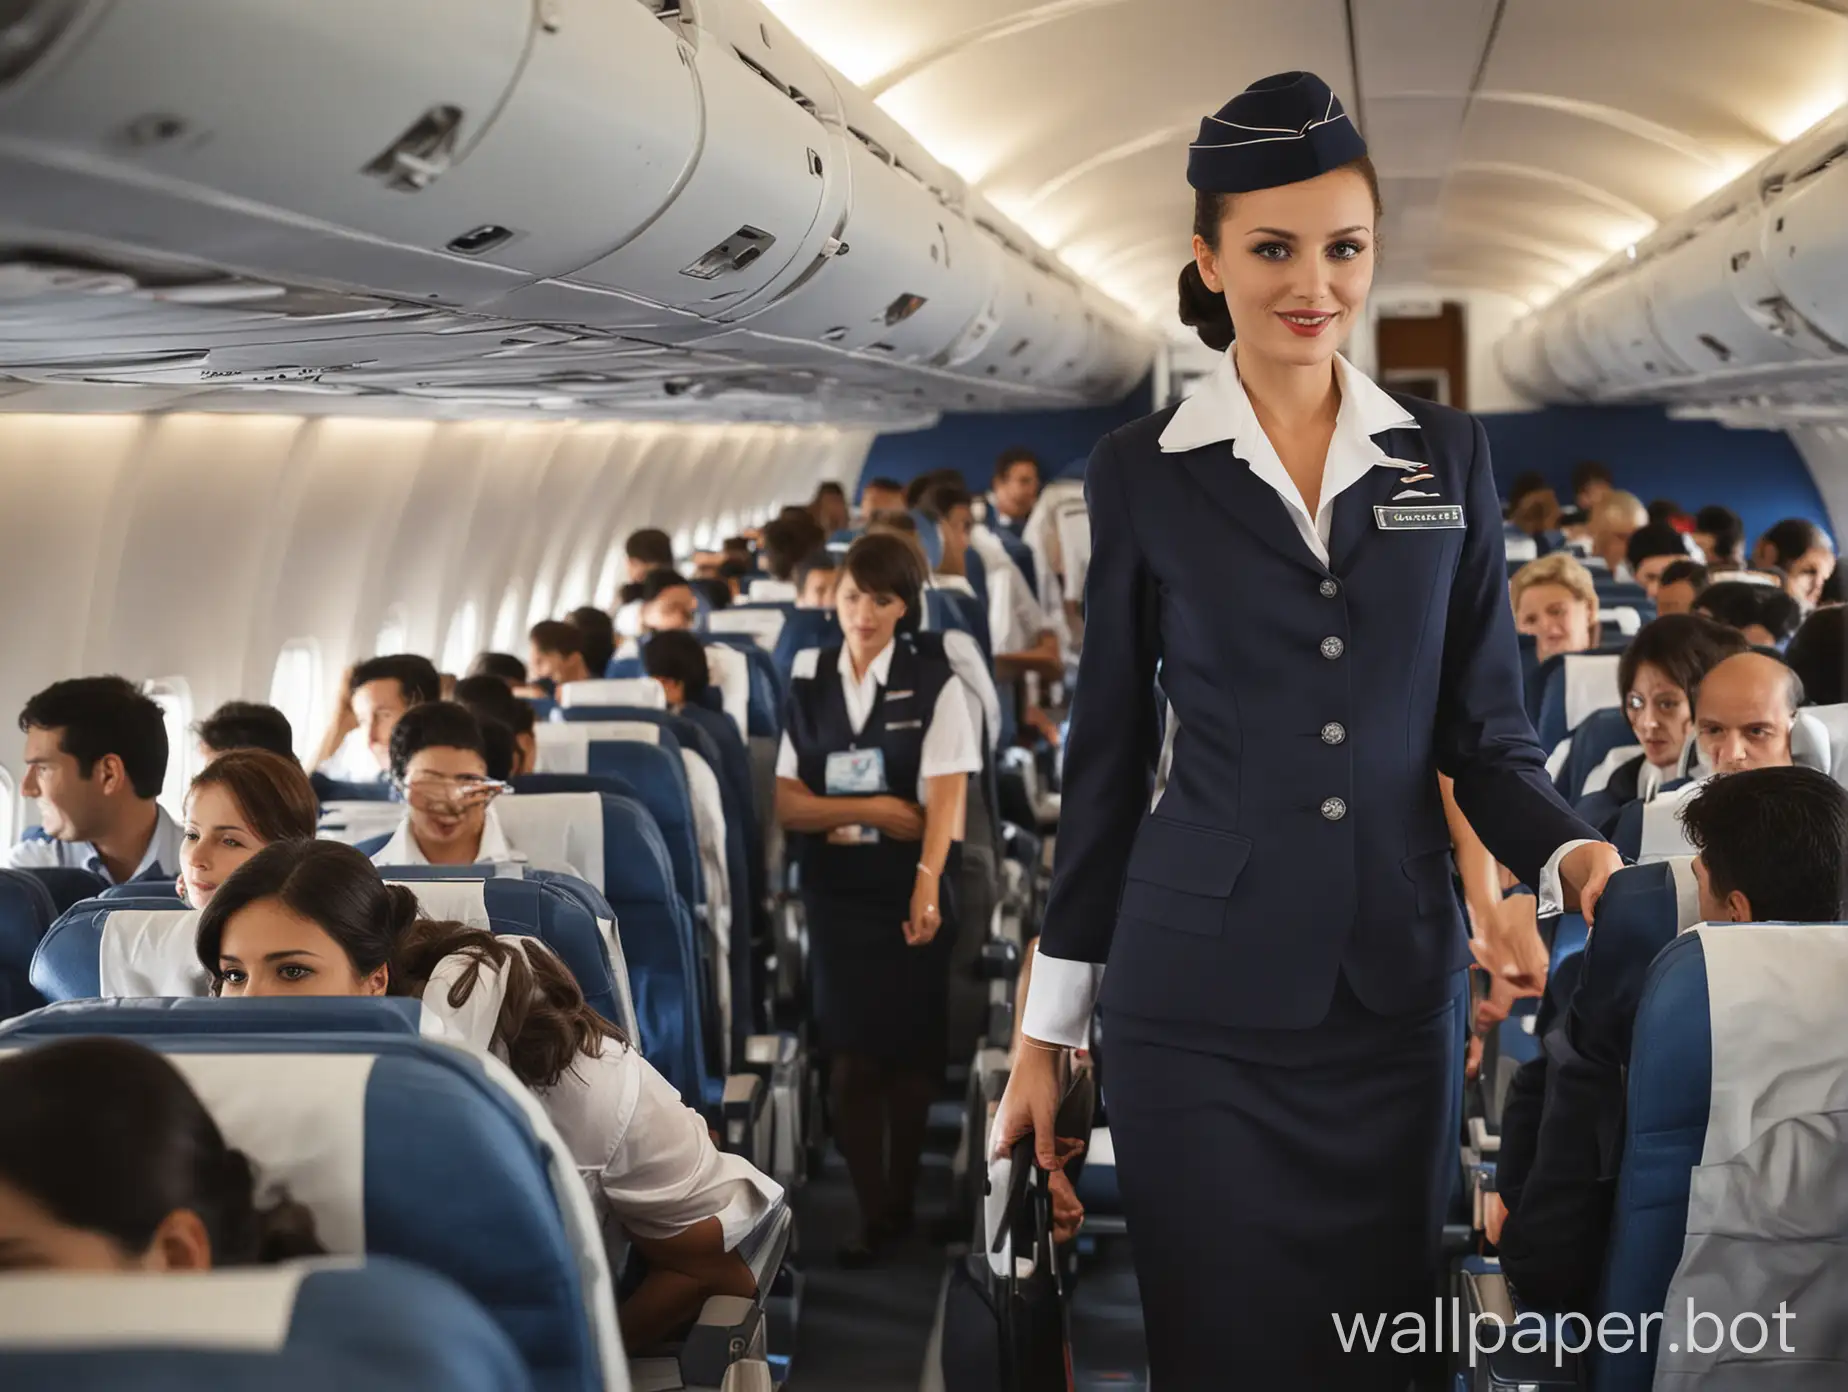 Air hostess attending to the needs of passengers on a flight.